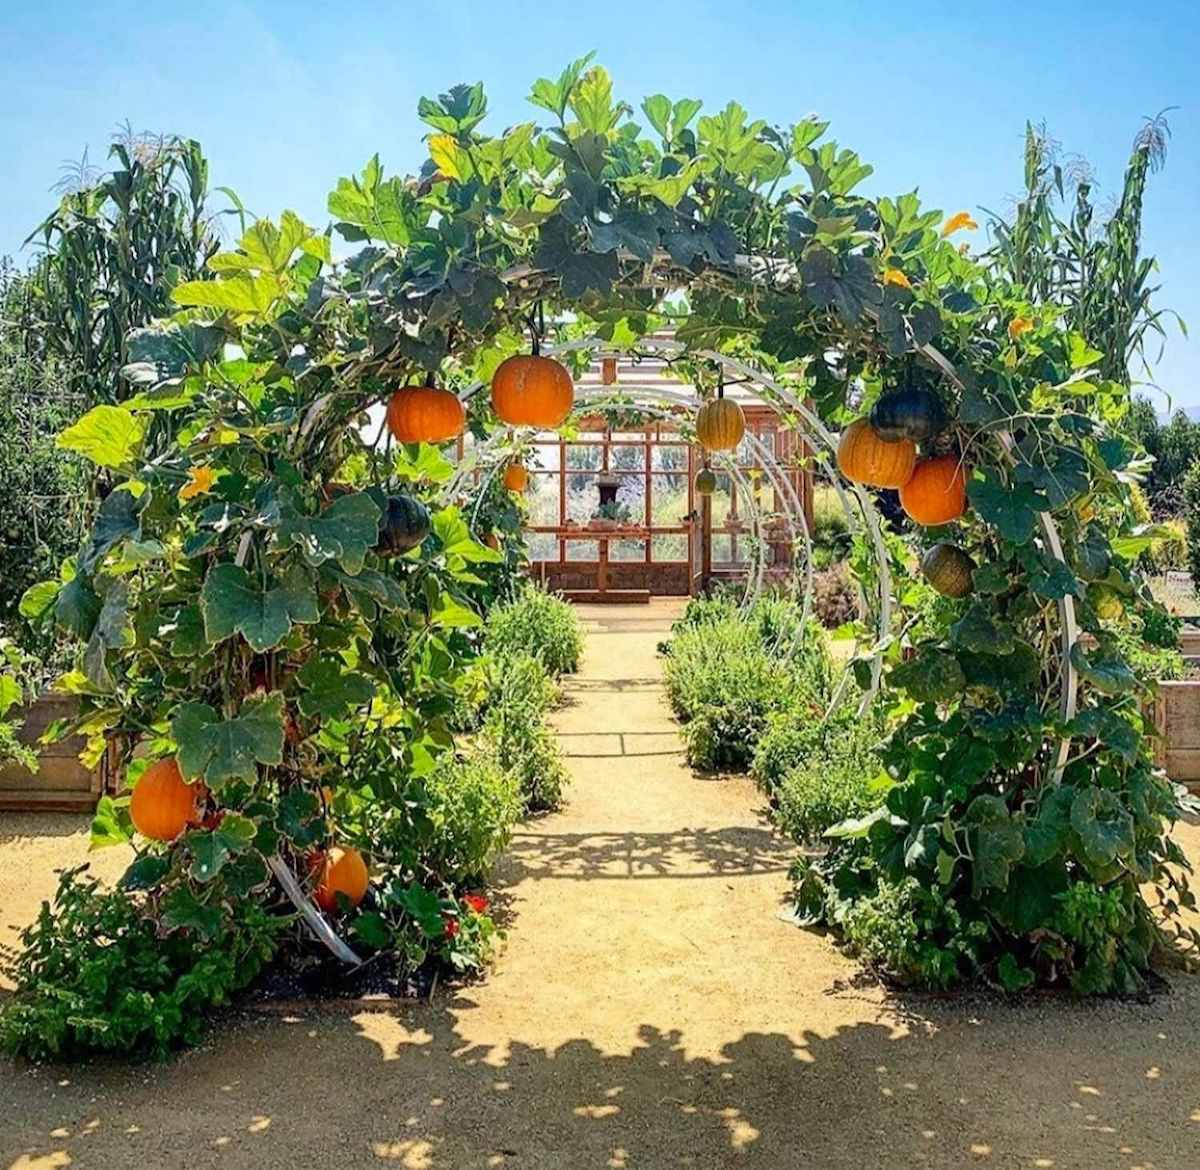 Large round arches are lined one after the next on the way to a glassed in sun room. The first trellis is covered in vining winter squash with orange pumpkin type squash hanging from the vines. 